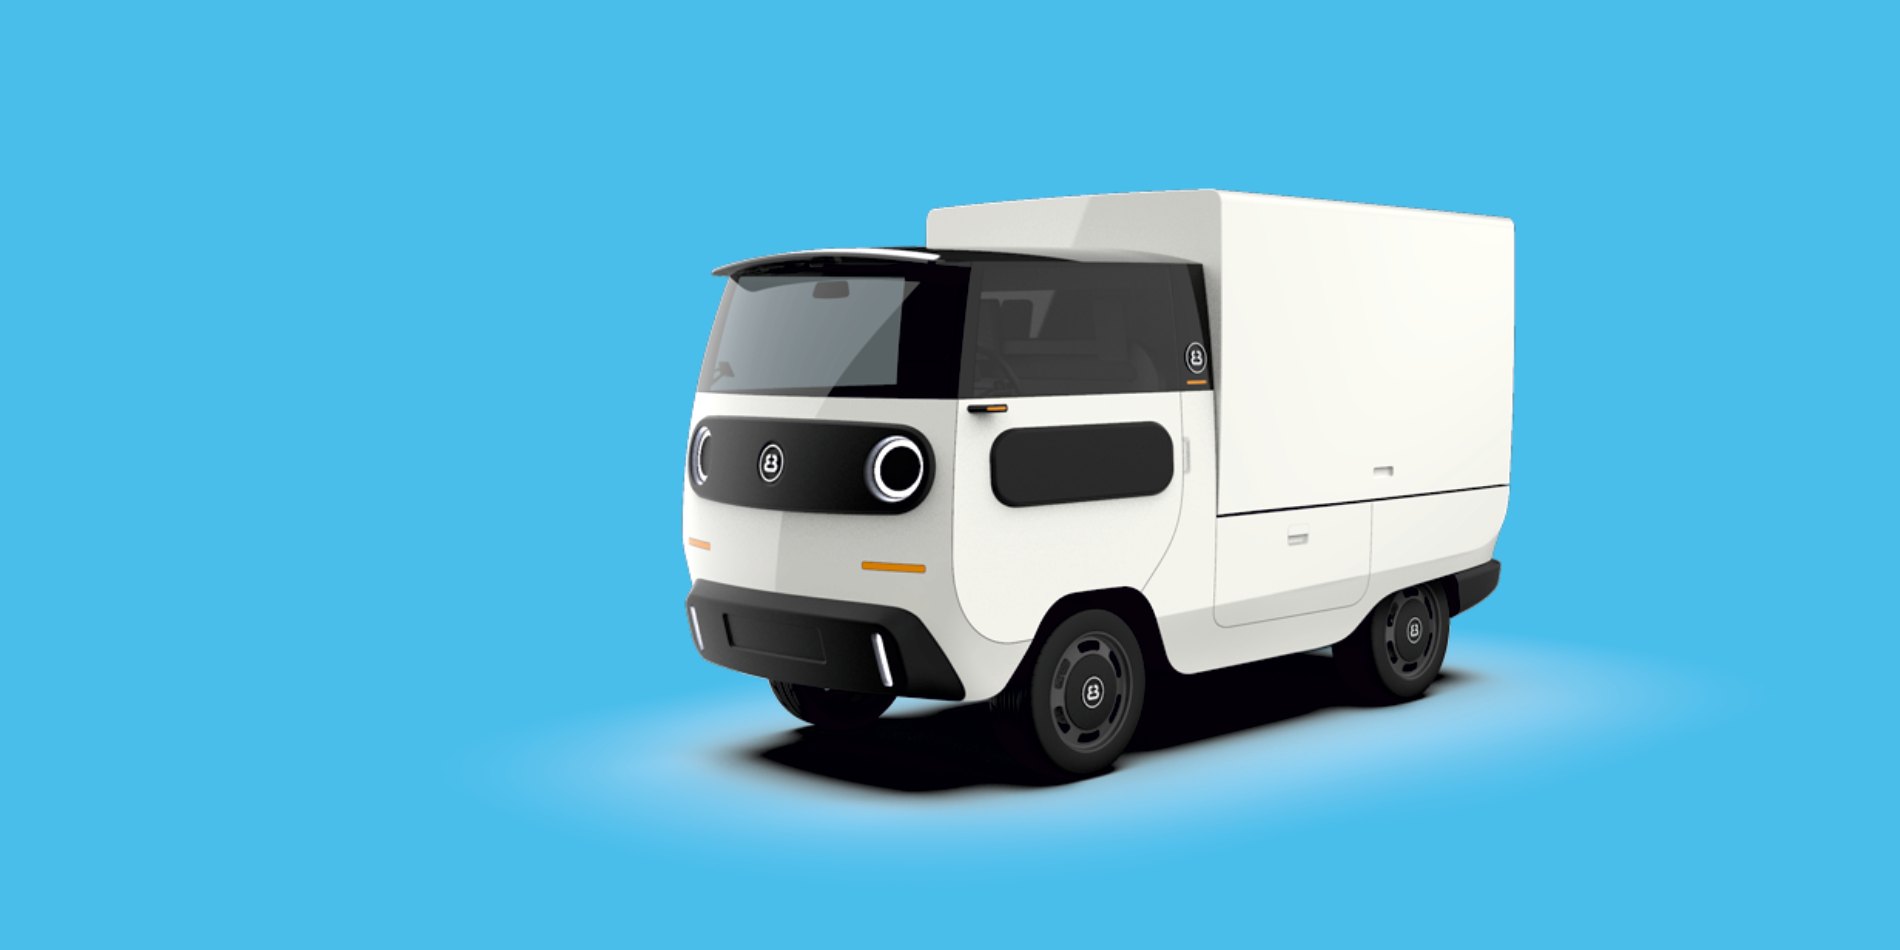 The World's First Modular Electric Vehicle